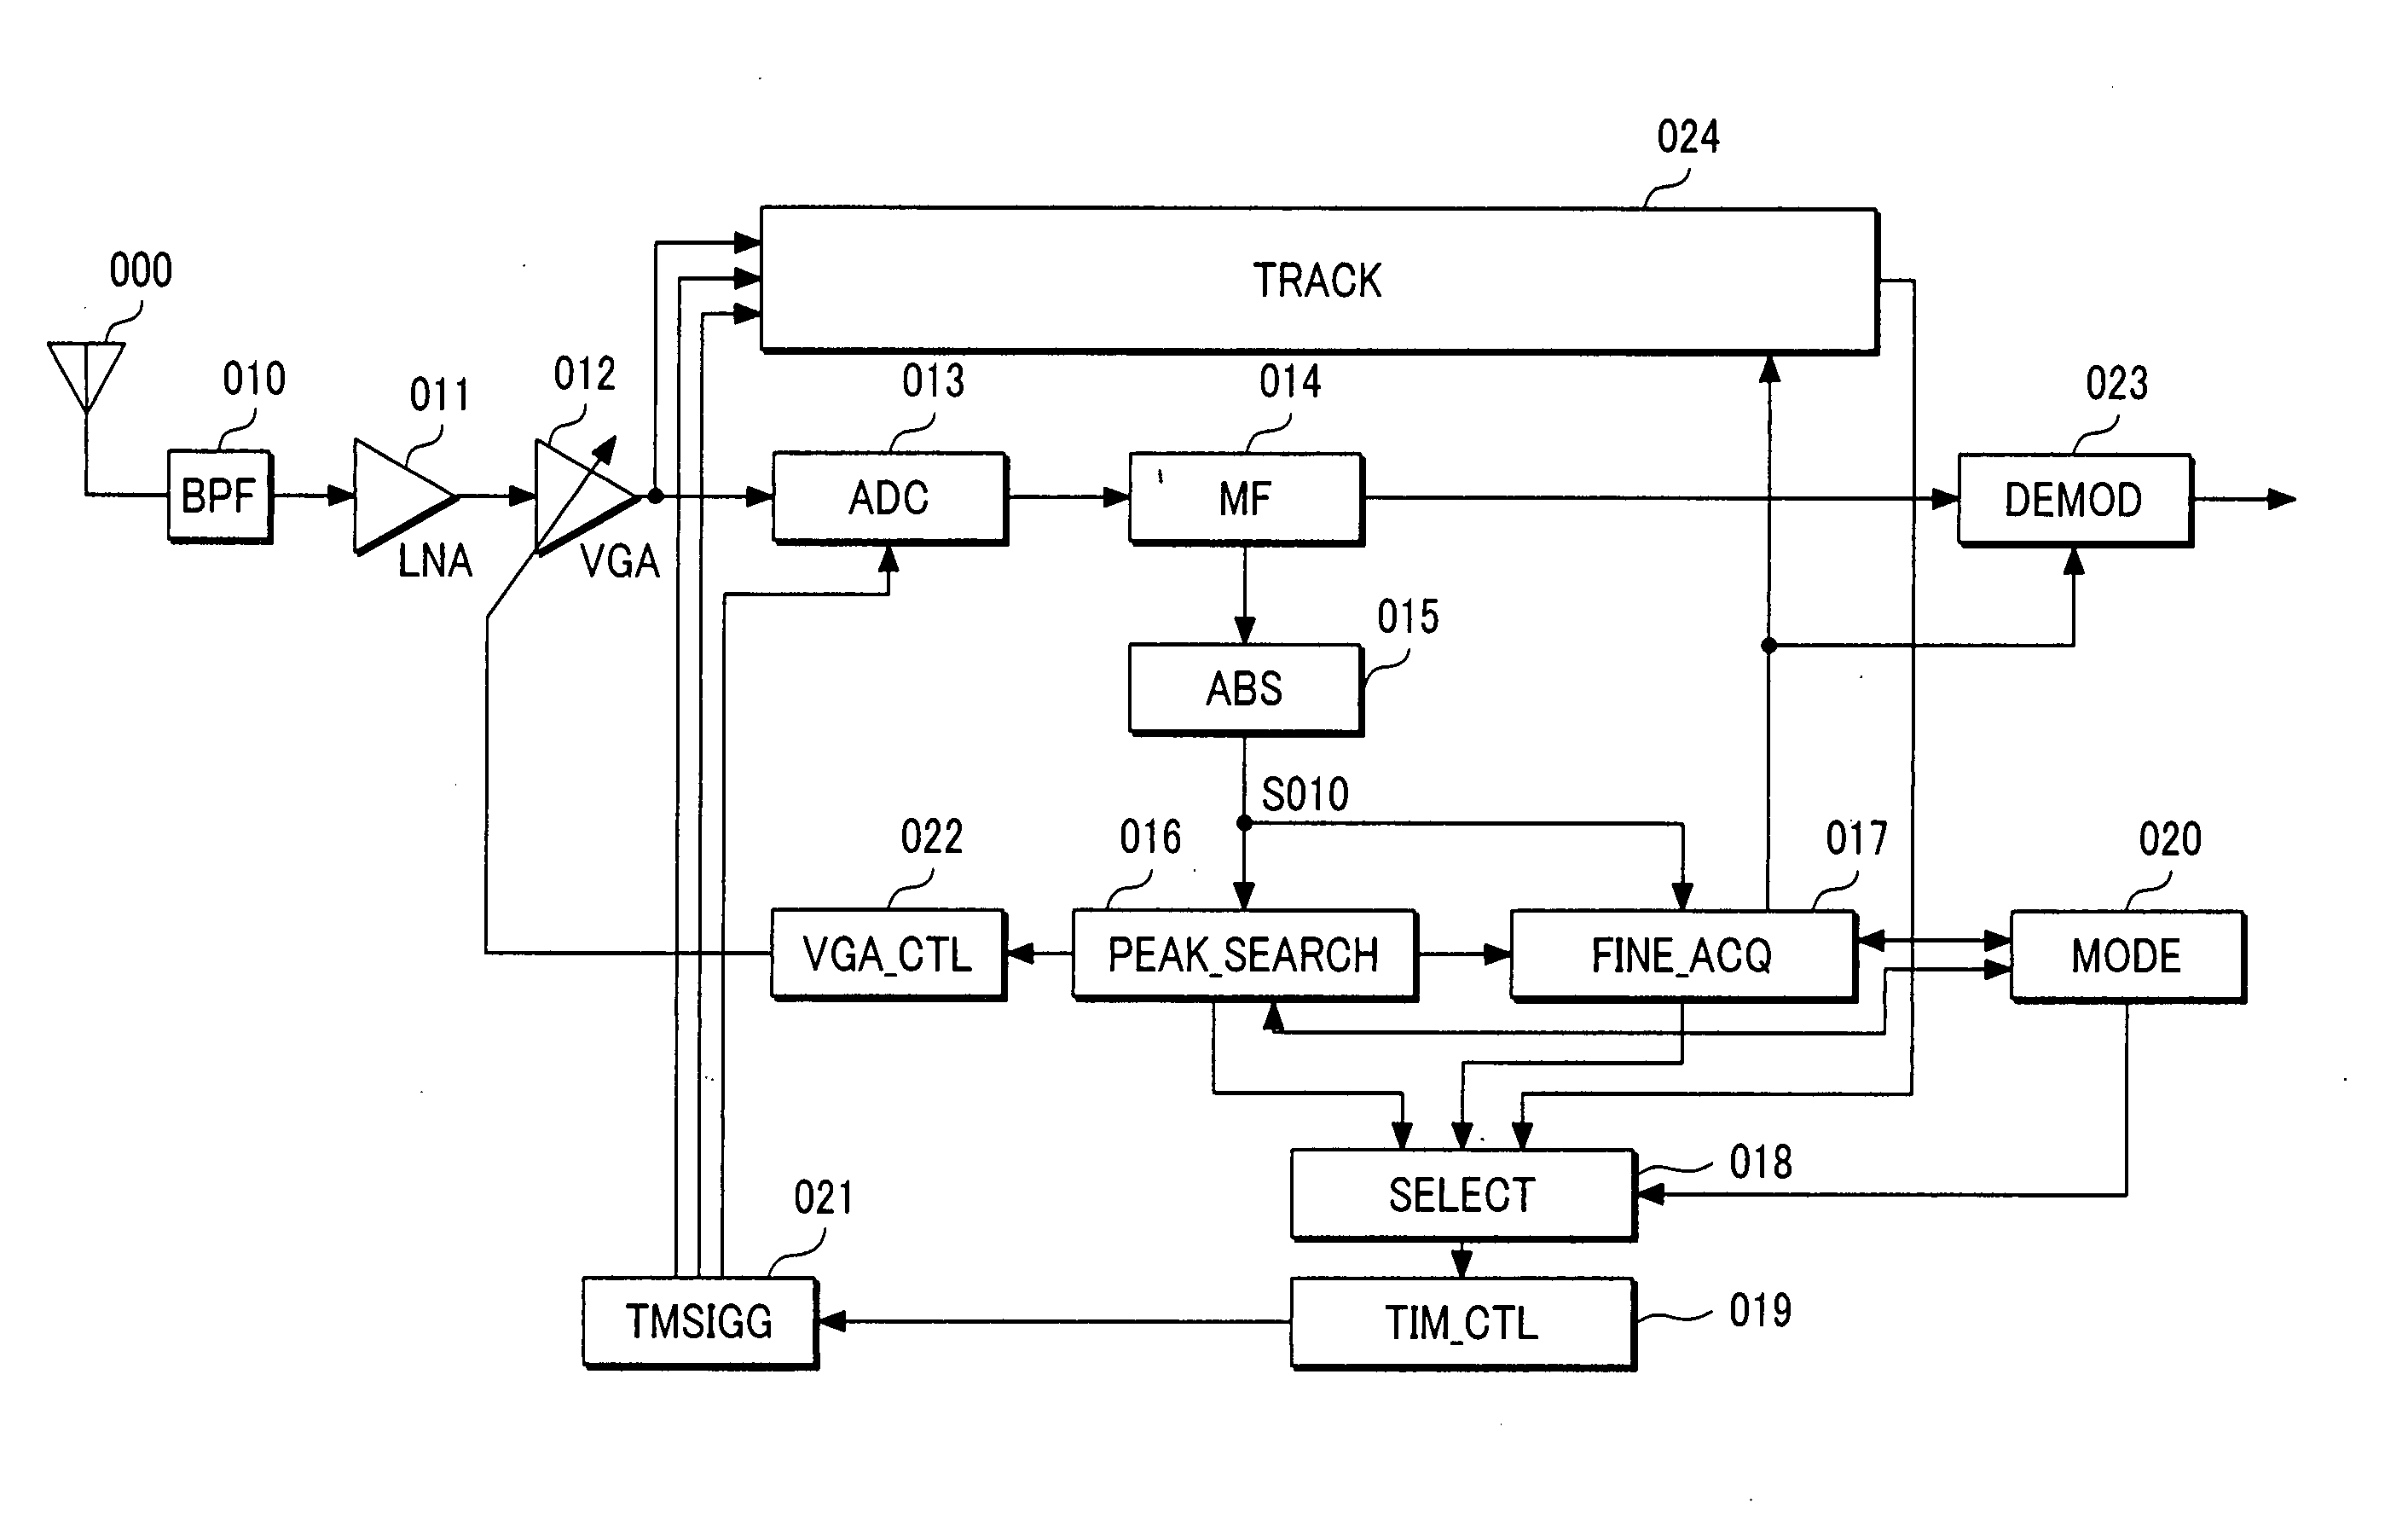 Receiving apparatus, communication apparatus and control apparatus using the same